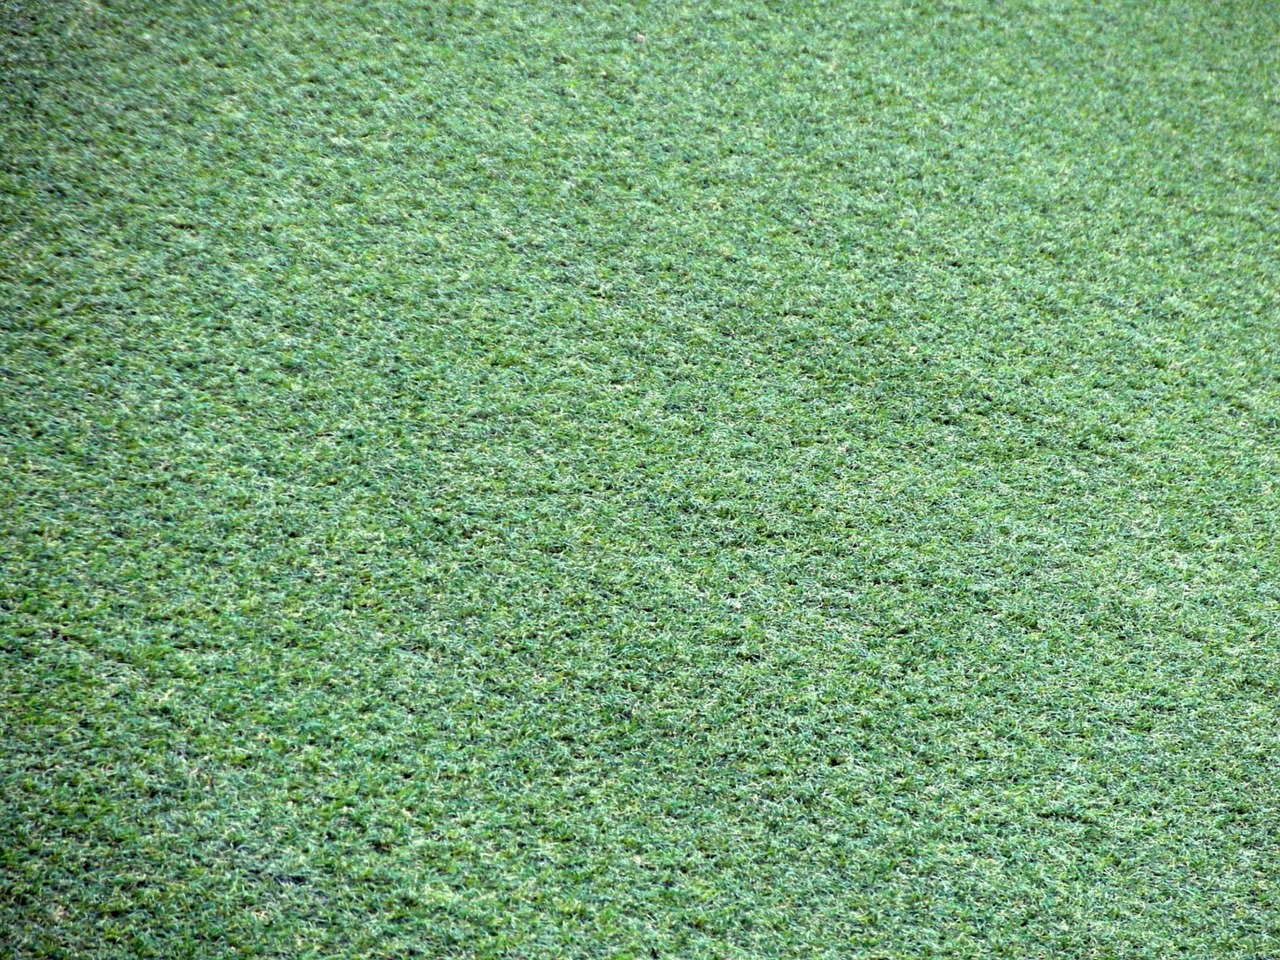 8 reasons to make the switch to fake grass